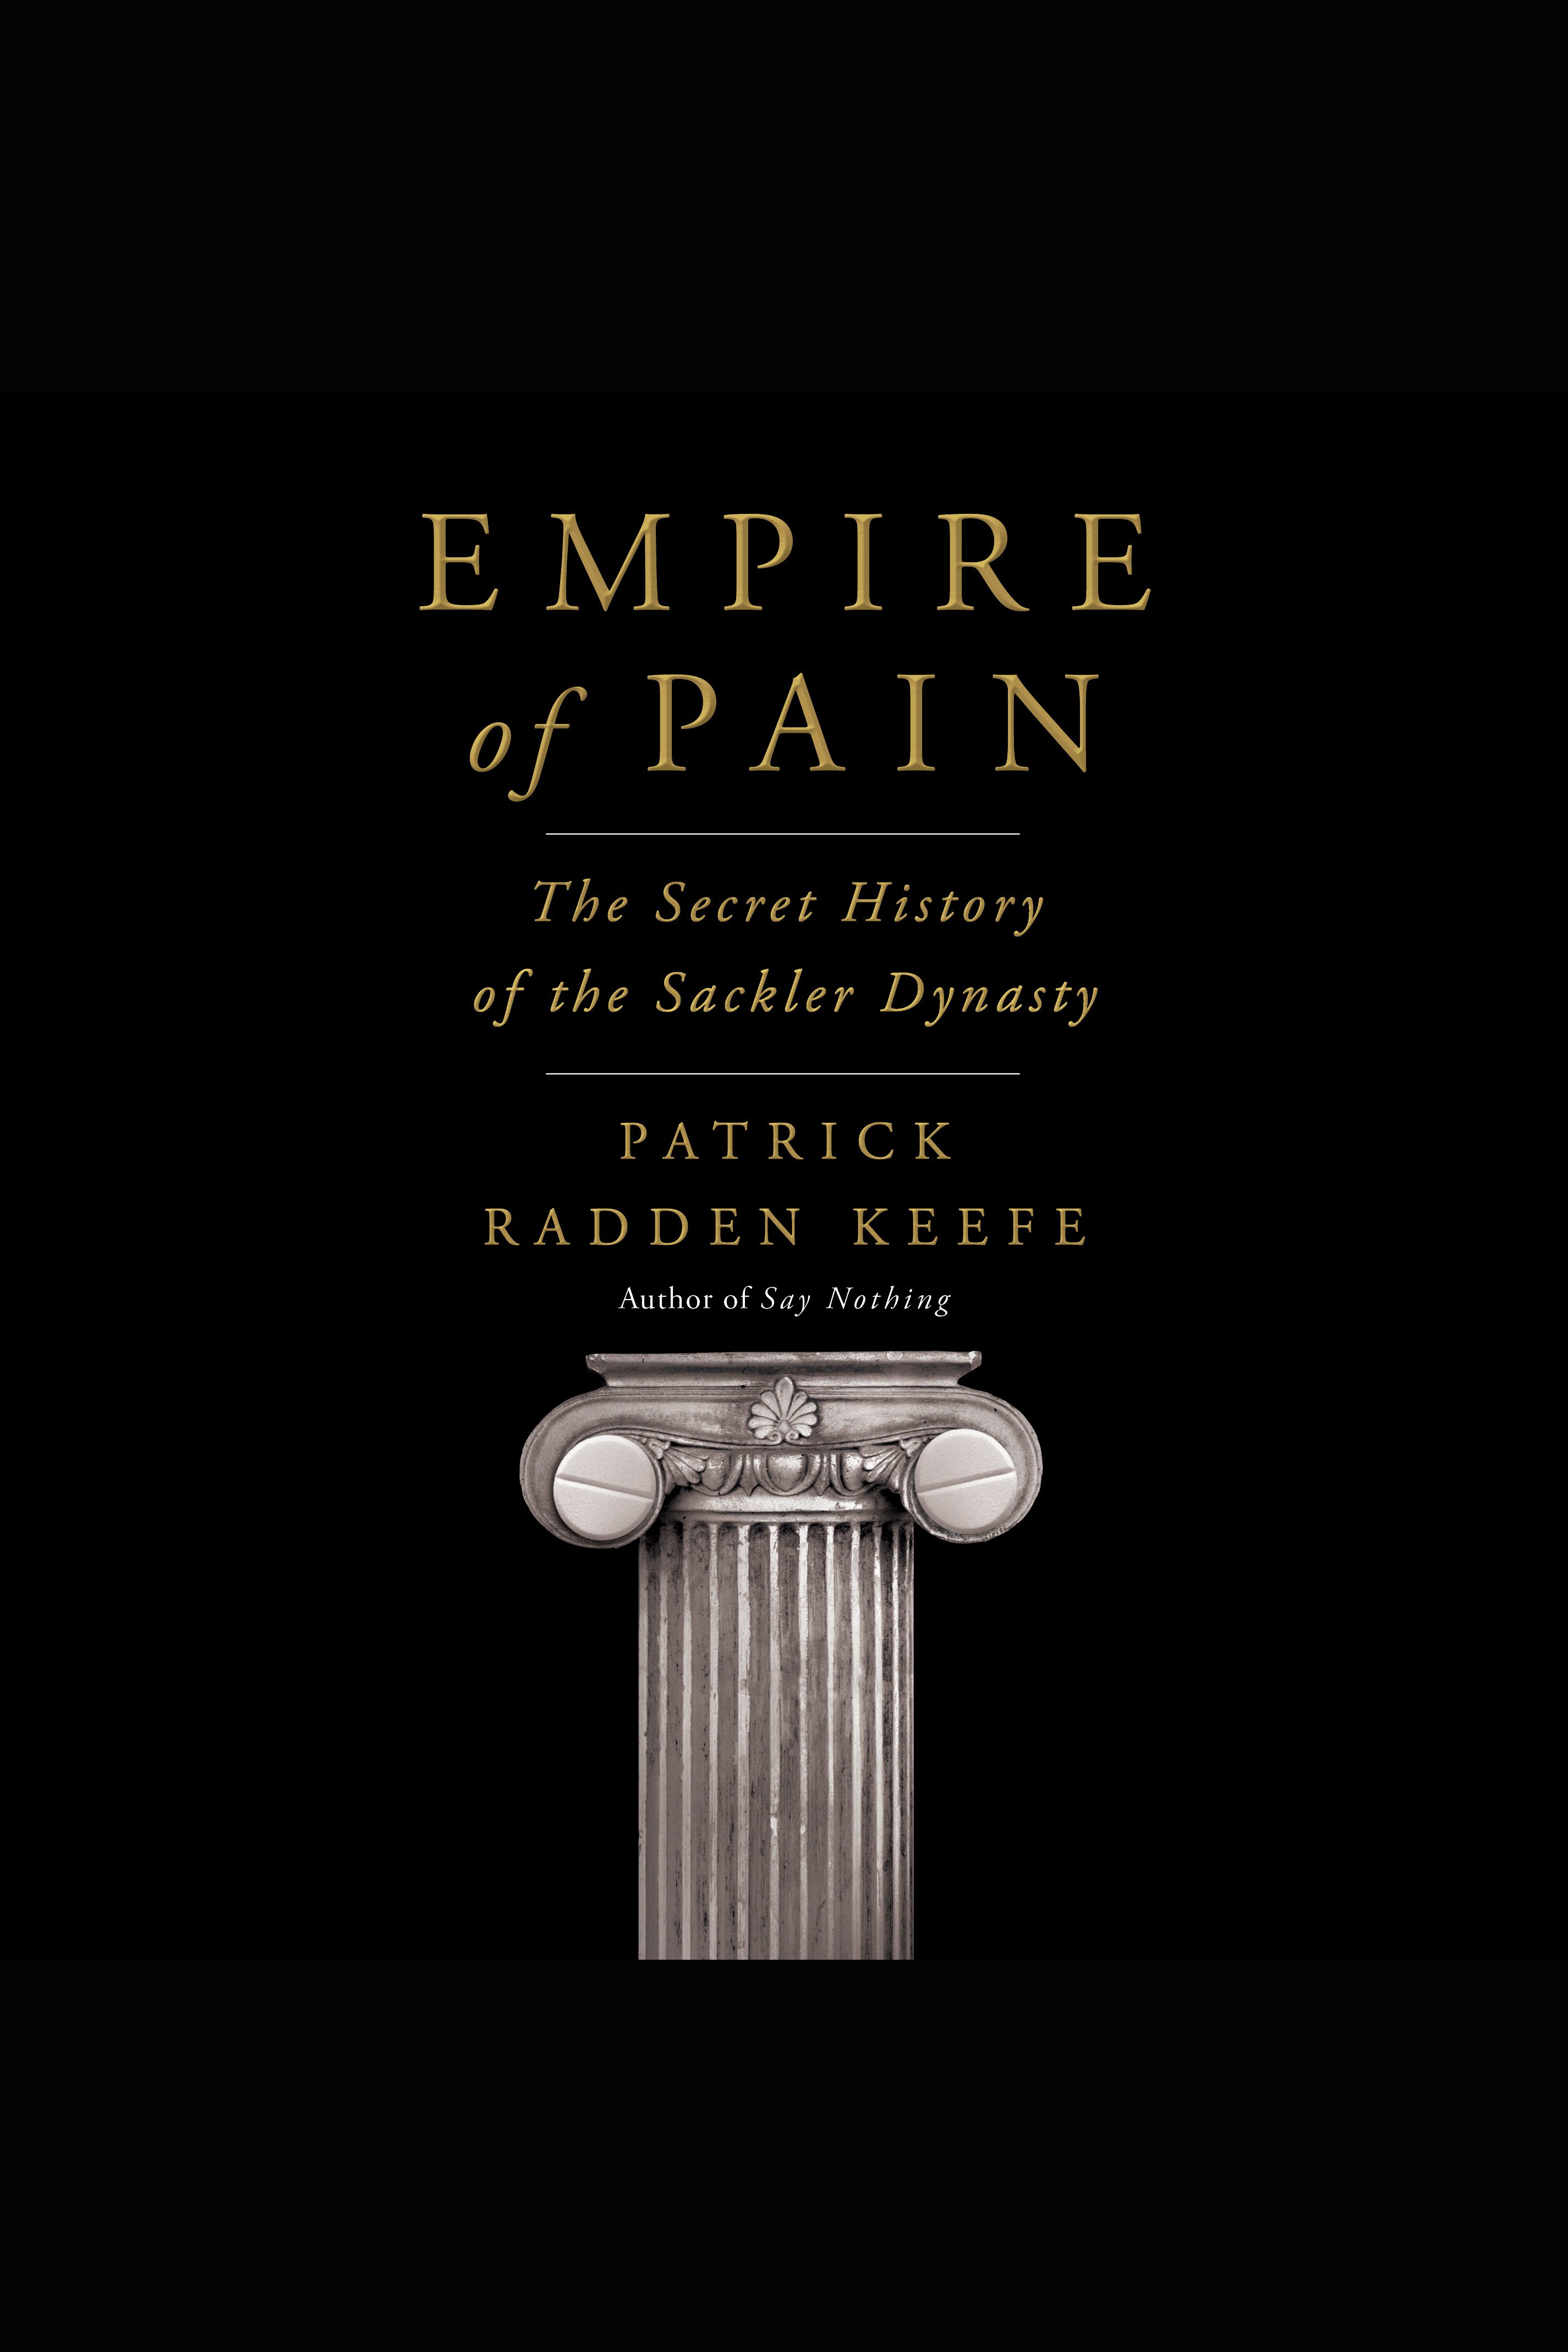 Empire of pain : the secret history of the Sackler dynasty